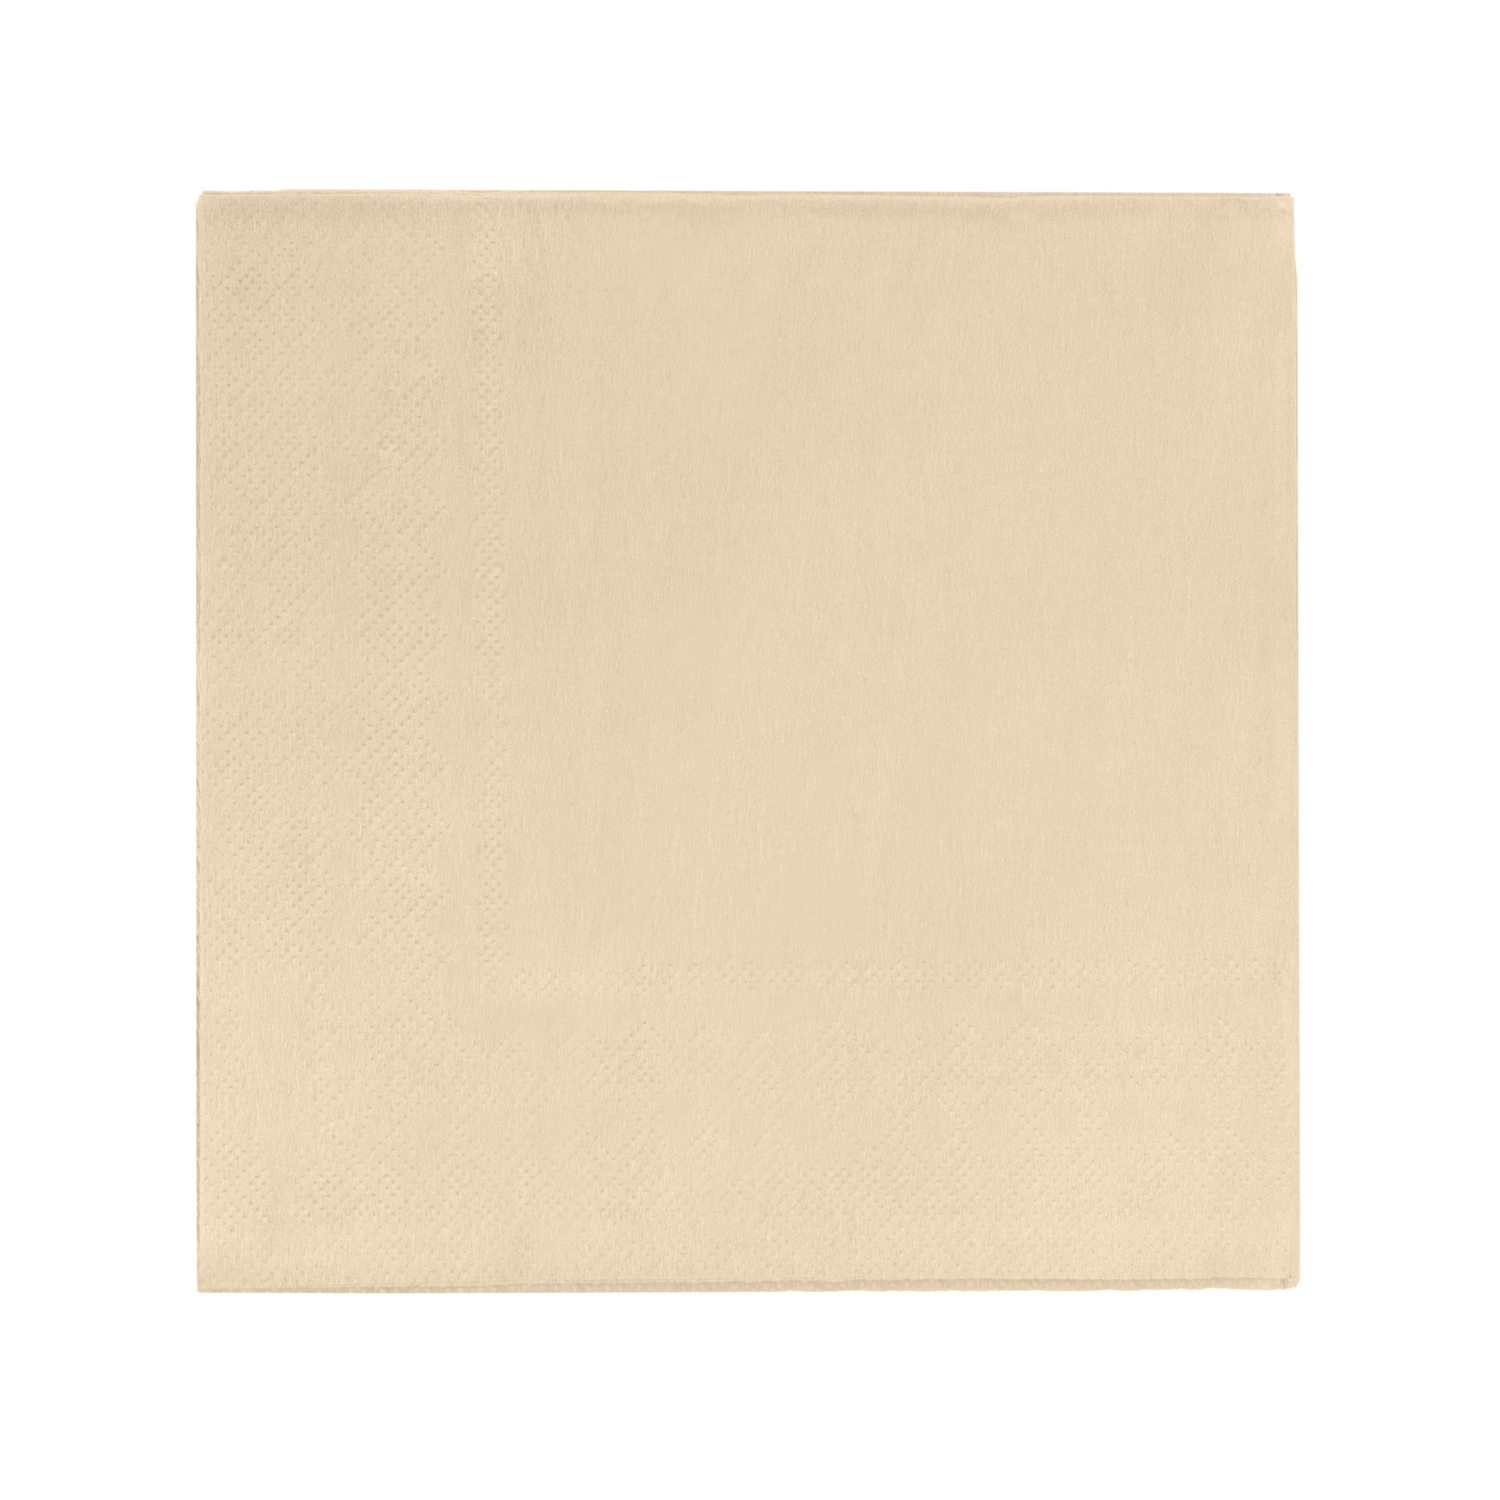 Ivory Luncheon Napkins | 3600 Pack